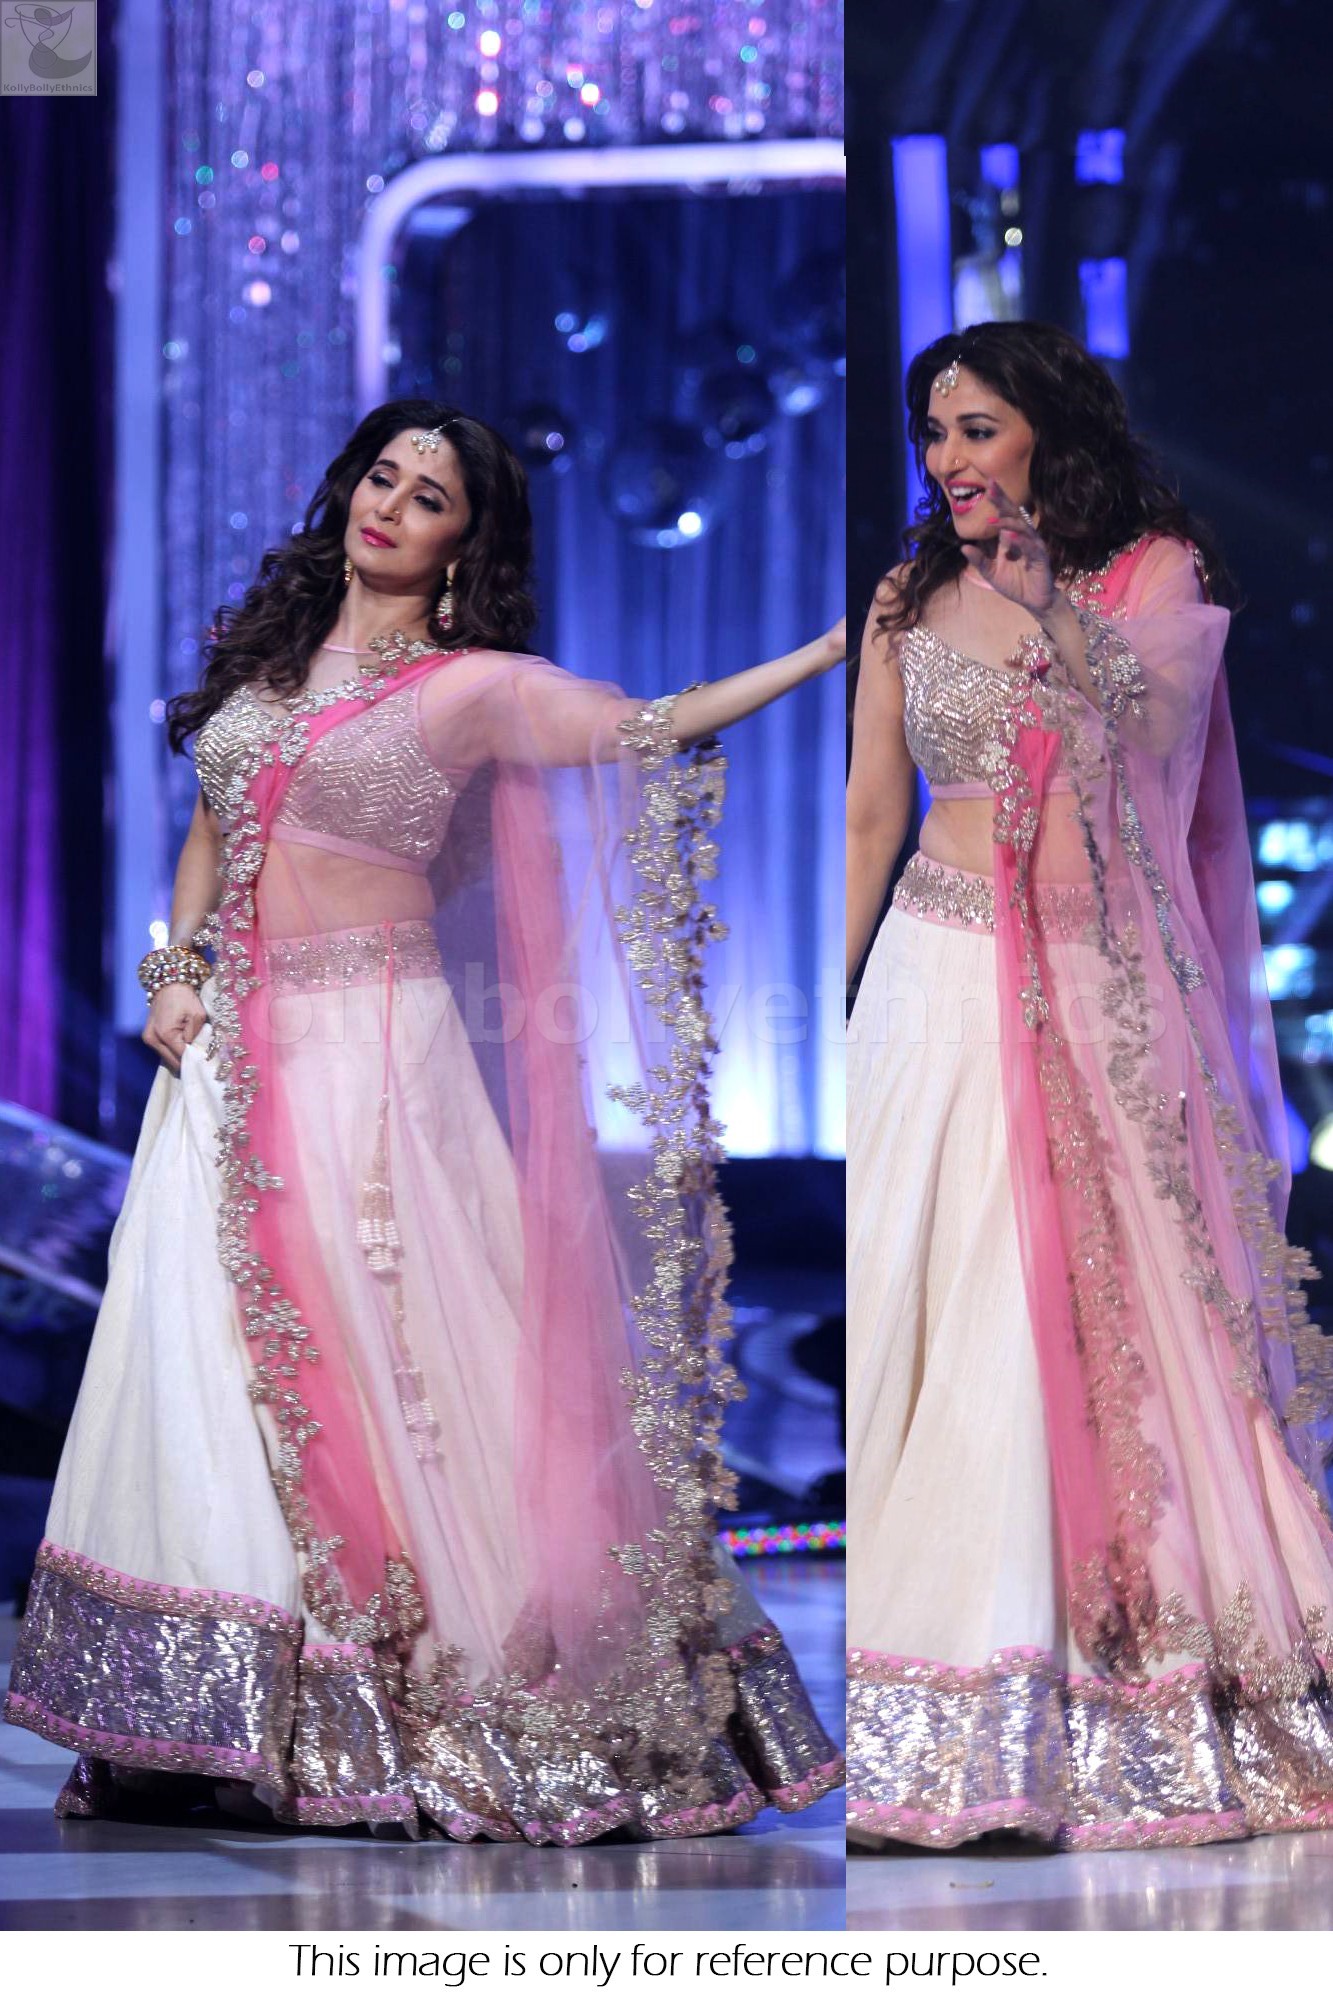 Bollywood Style Madhuri Dixit Jhalak Dhikla jaa Georgette net and silver dhupion lehenga in pink and